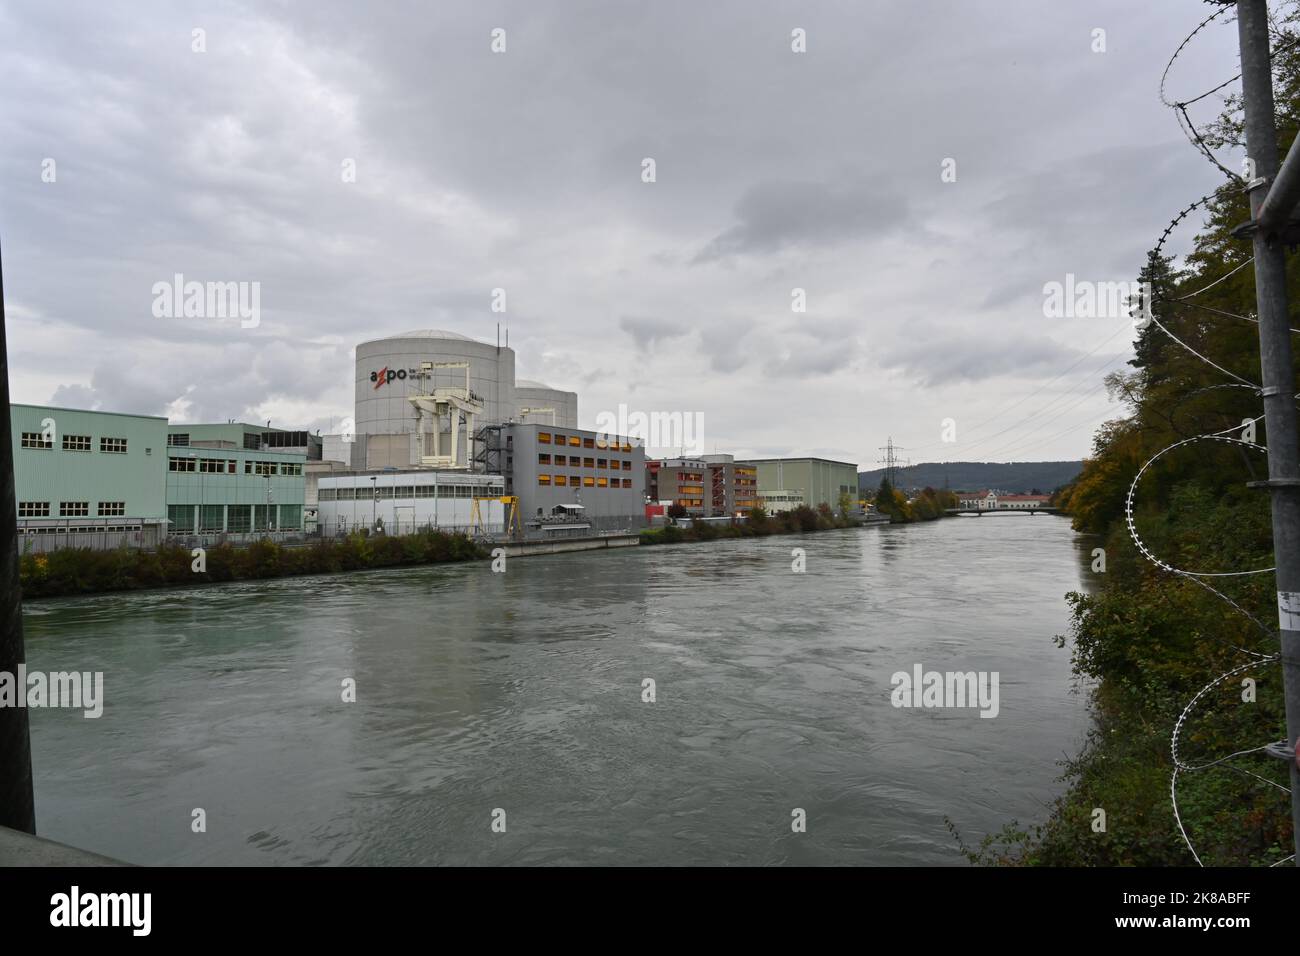 View on a nuclear power plant Beznau, owned by Axpo, from the bridge over river Aare. Stock Photo